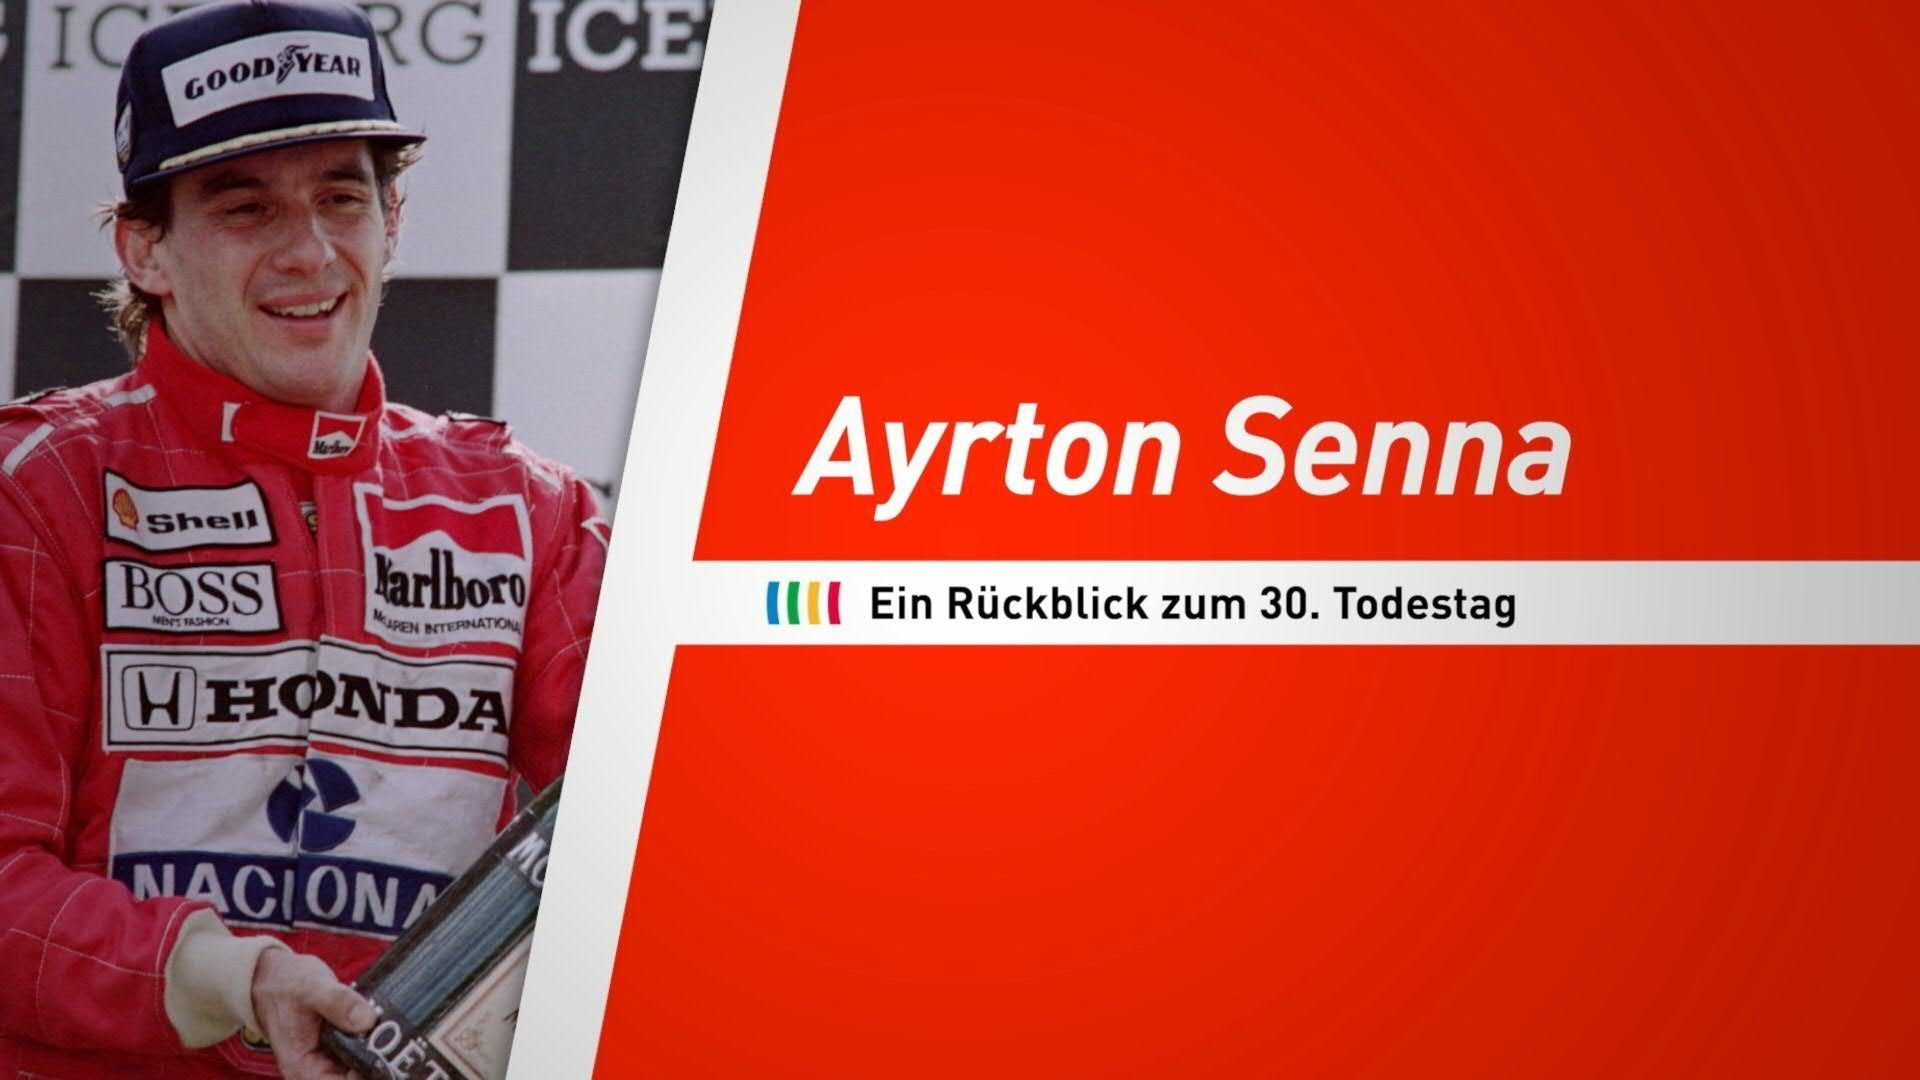 Ayrton Senna: A look back on the 30th anniversary of his death